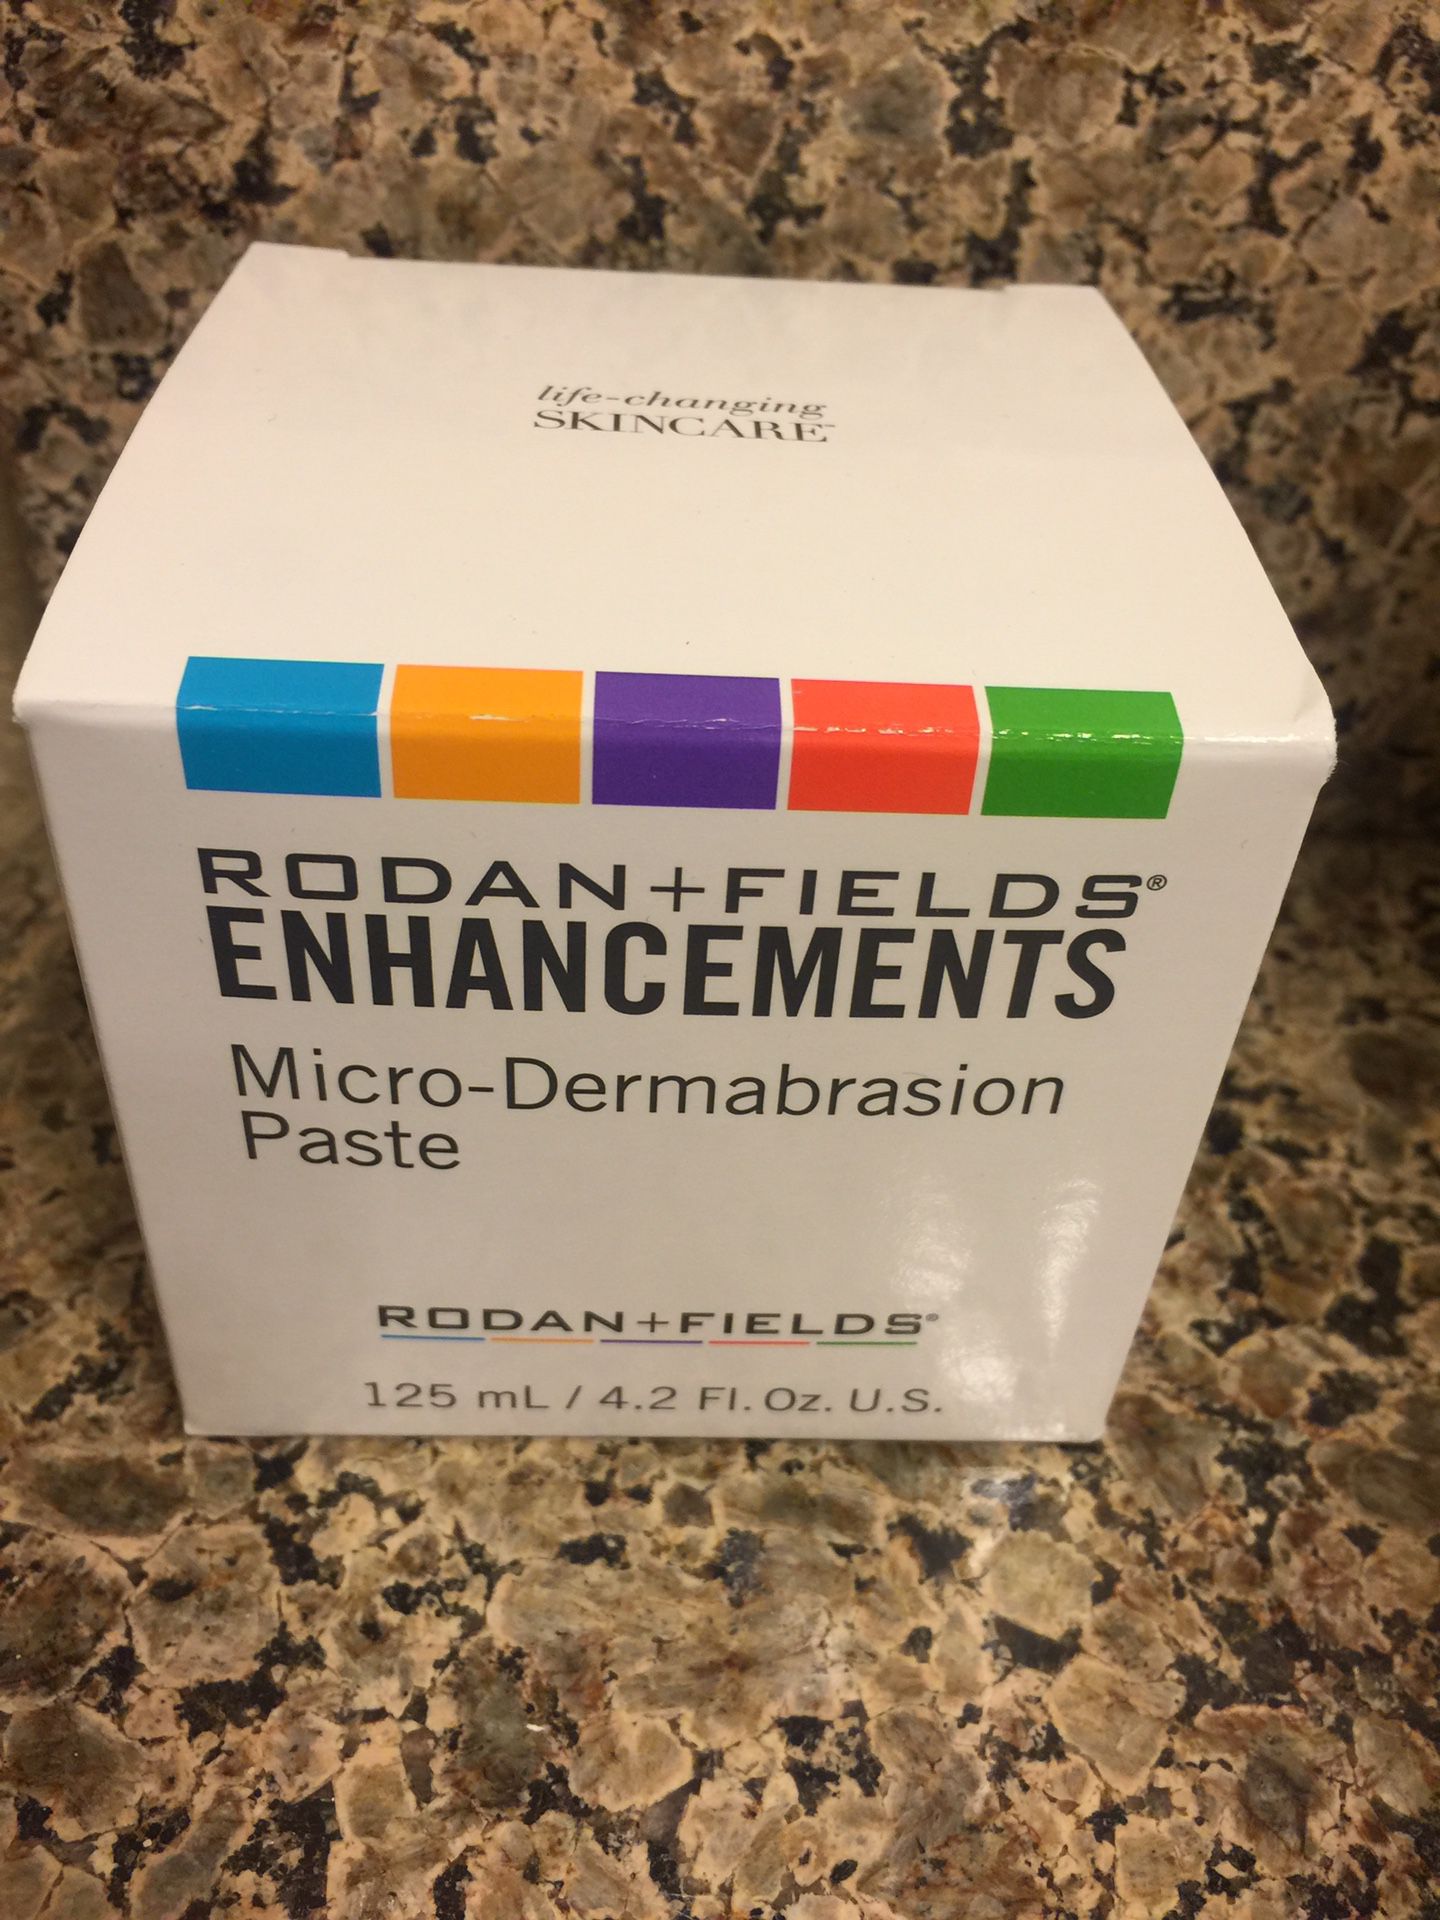 R+F Rodan Fields Enhancements Micro-Dermabrasion Paste and Samples